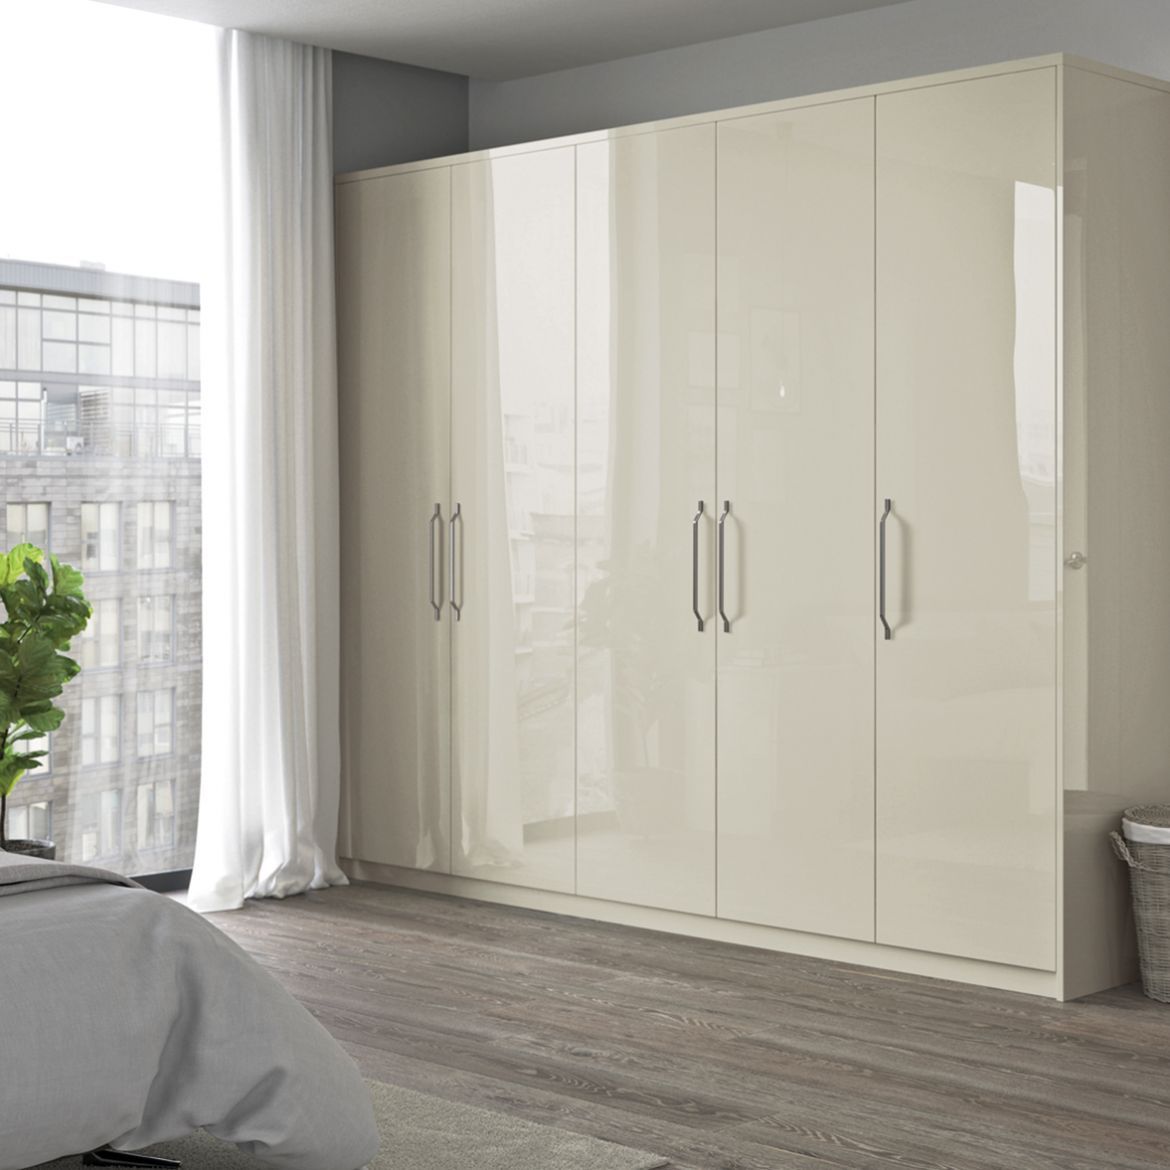 Reflections Wardrobe | Cash & Carry Kitchens Pertaining To High Gloss Wardrobes (View 7 of 15)